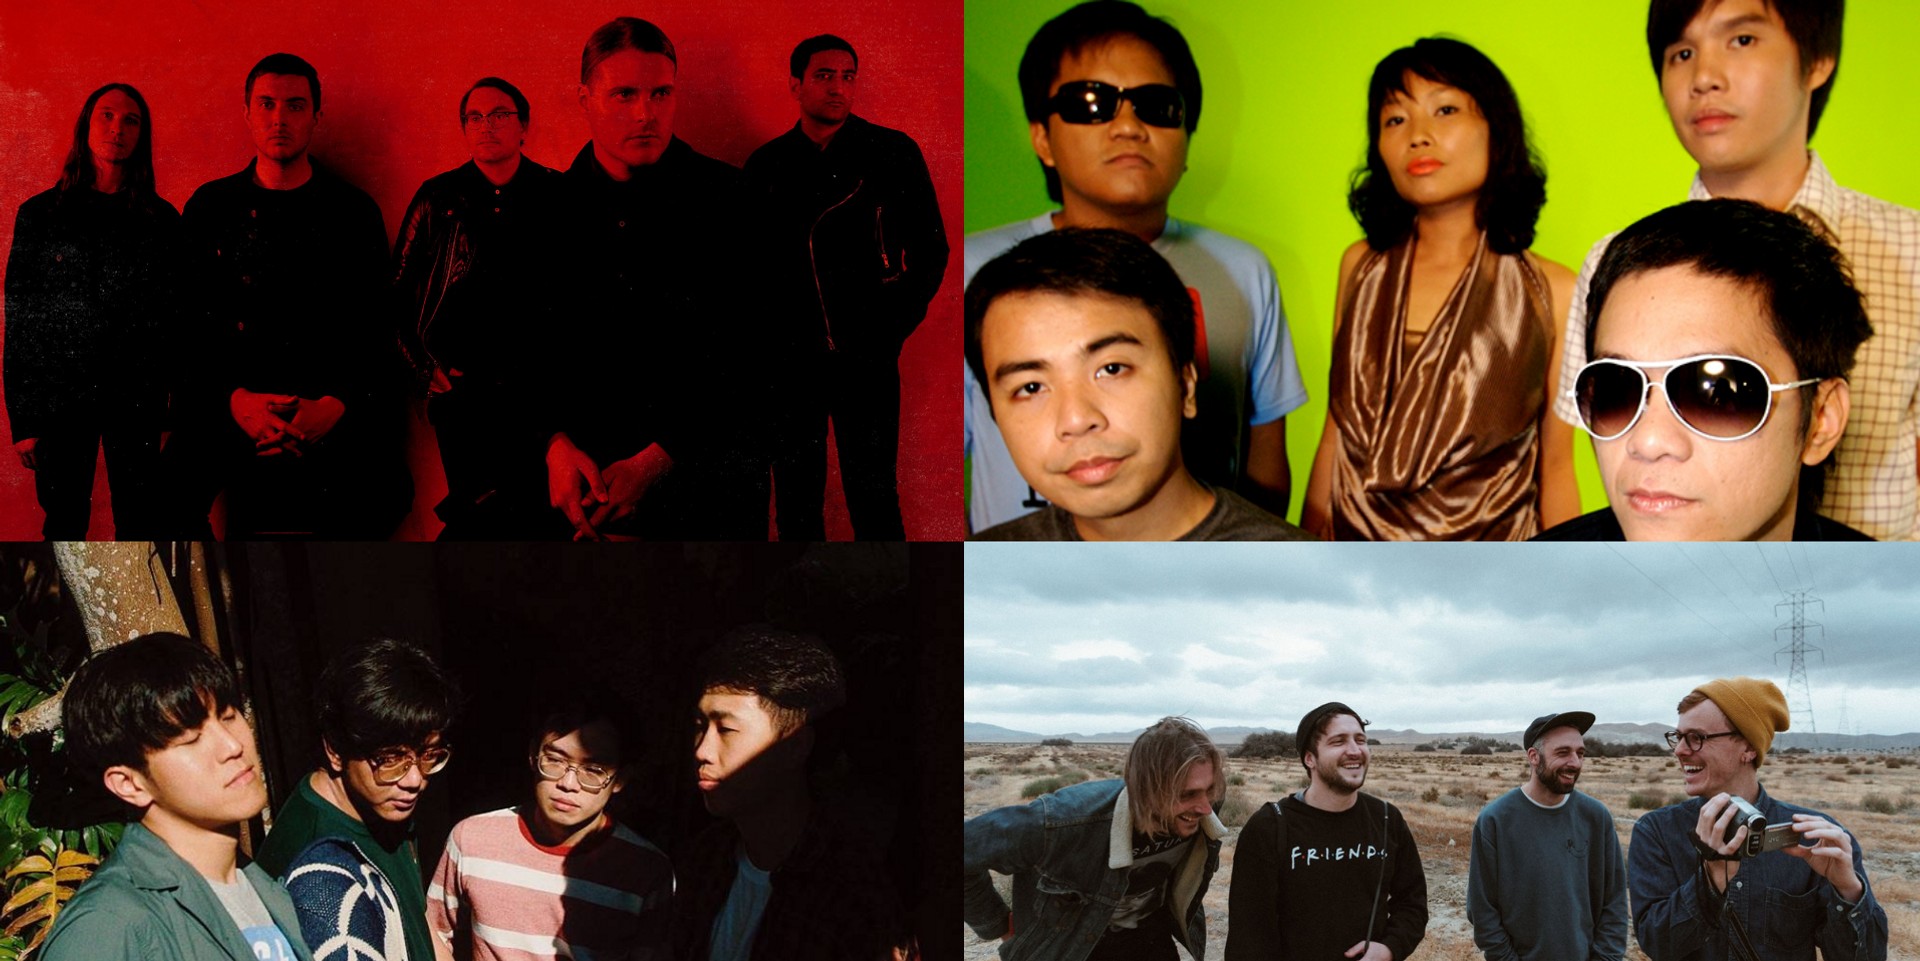 All of the Noise 2019 announce first wave lineup - Deafheaven, Delta Sleep, Cambio, and M1LDL1FE